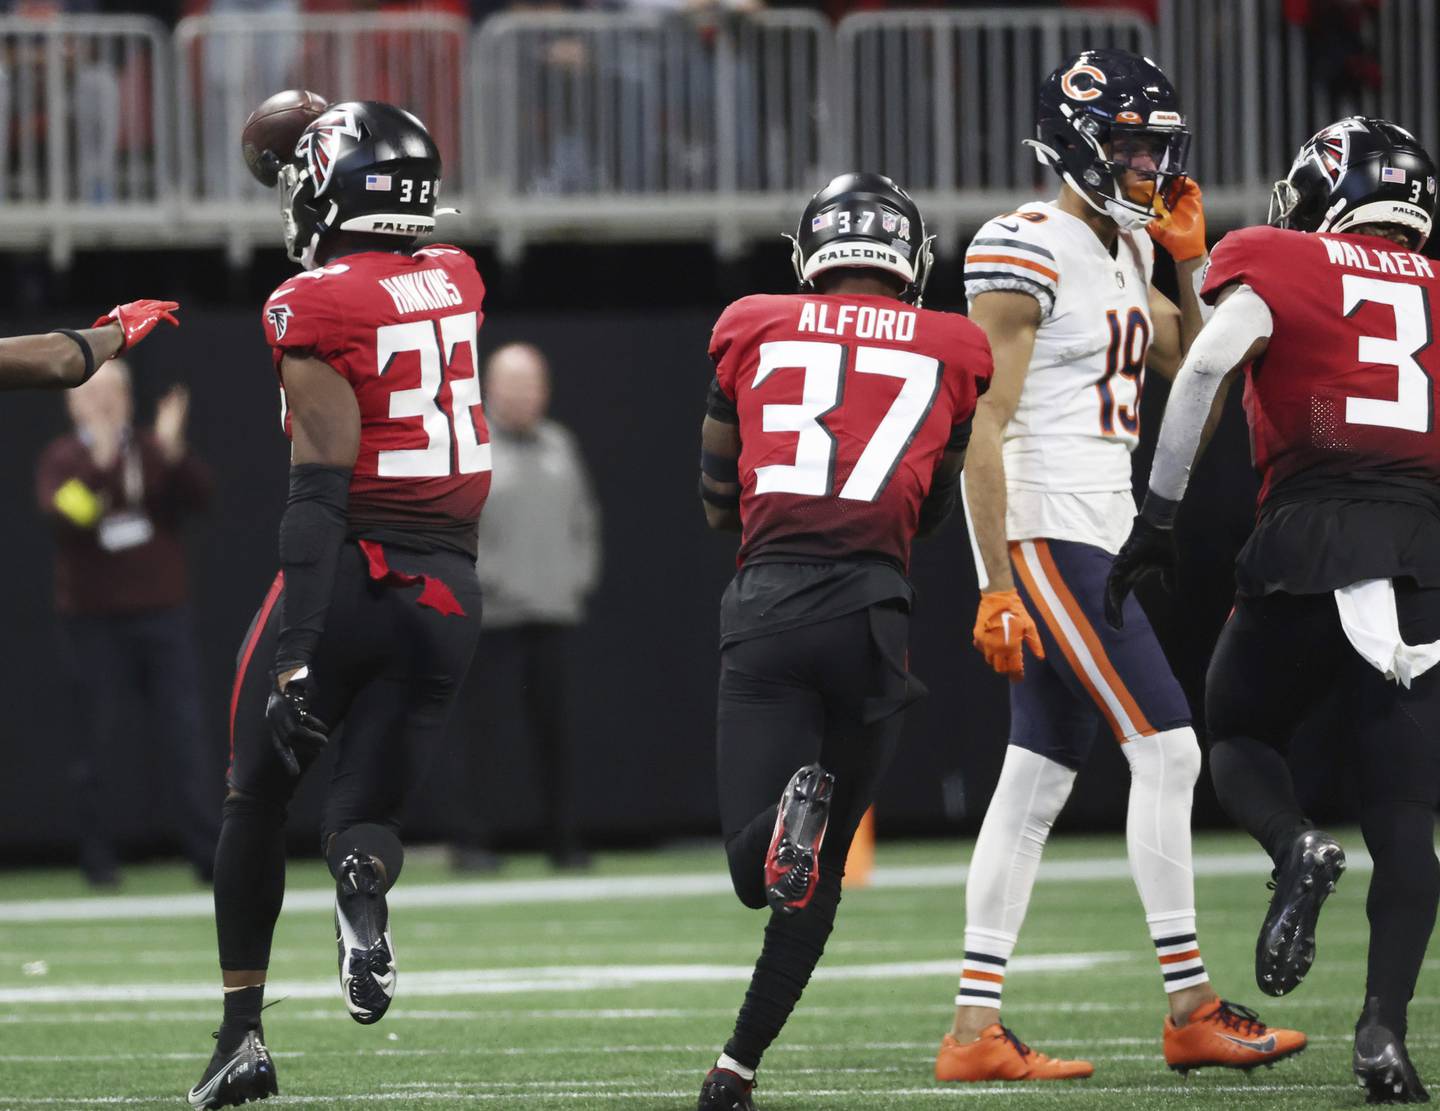 Bears wide receiver Equanimeous St. Brown (19) heads to the sideline after the final offensive drive results in an interception by Falcons safety Jaylinn Hawkins (32) on Nov. 20, 2022, in Atlanta.